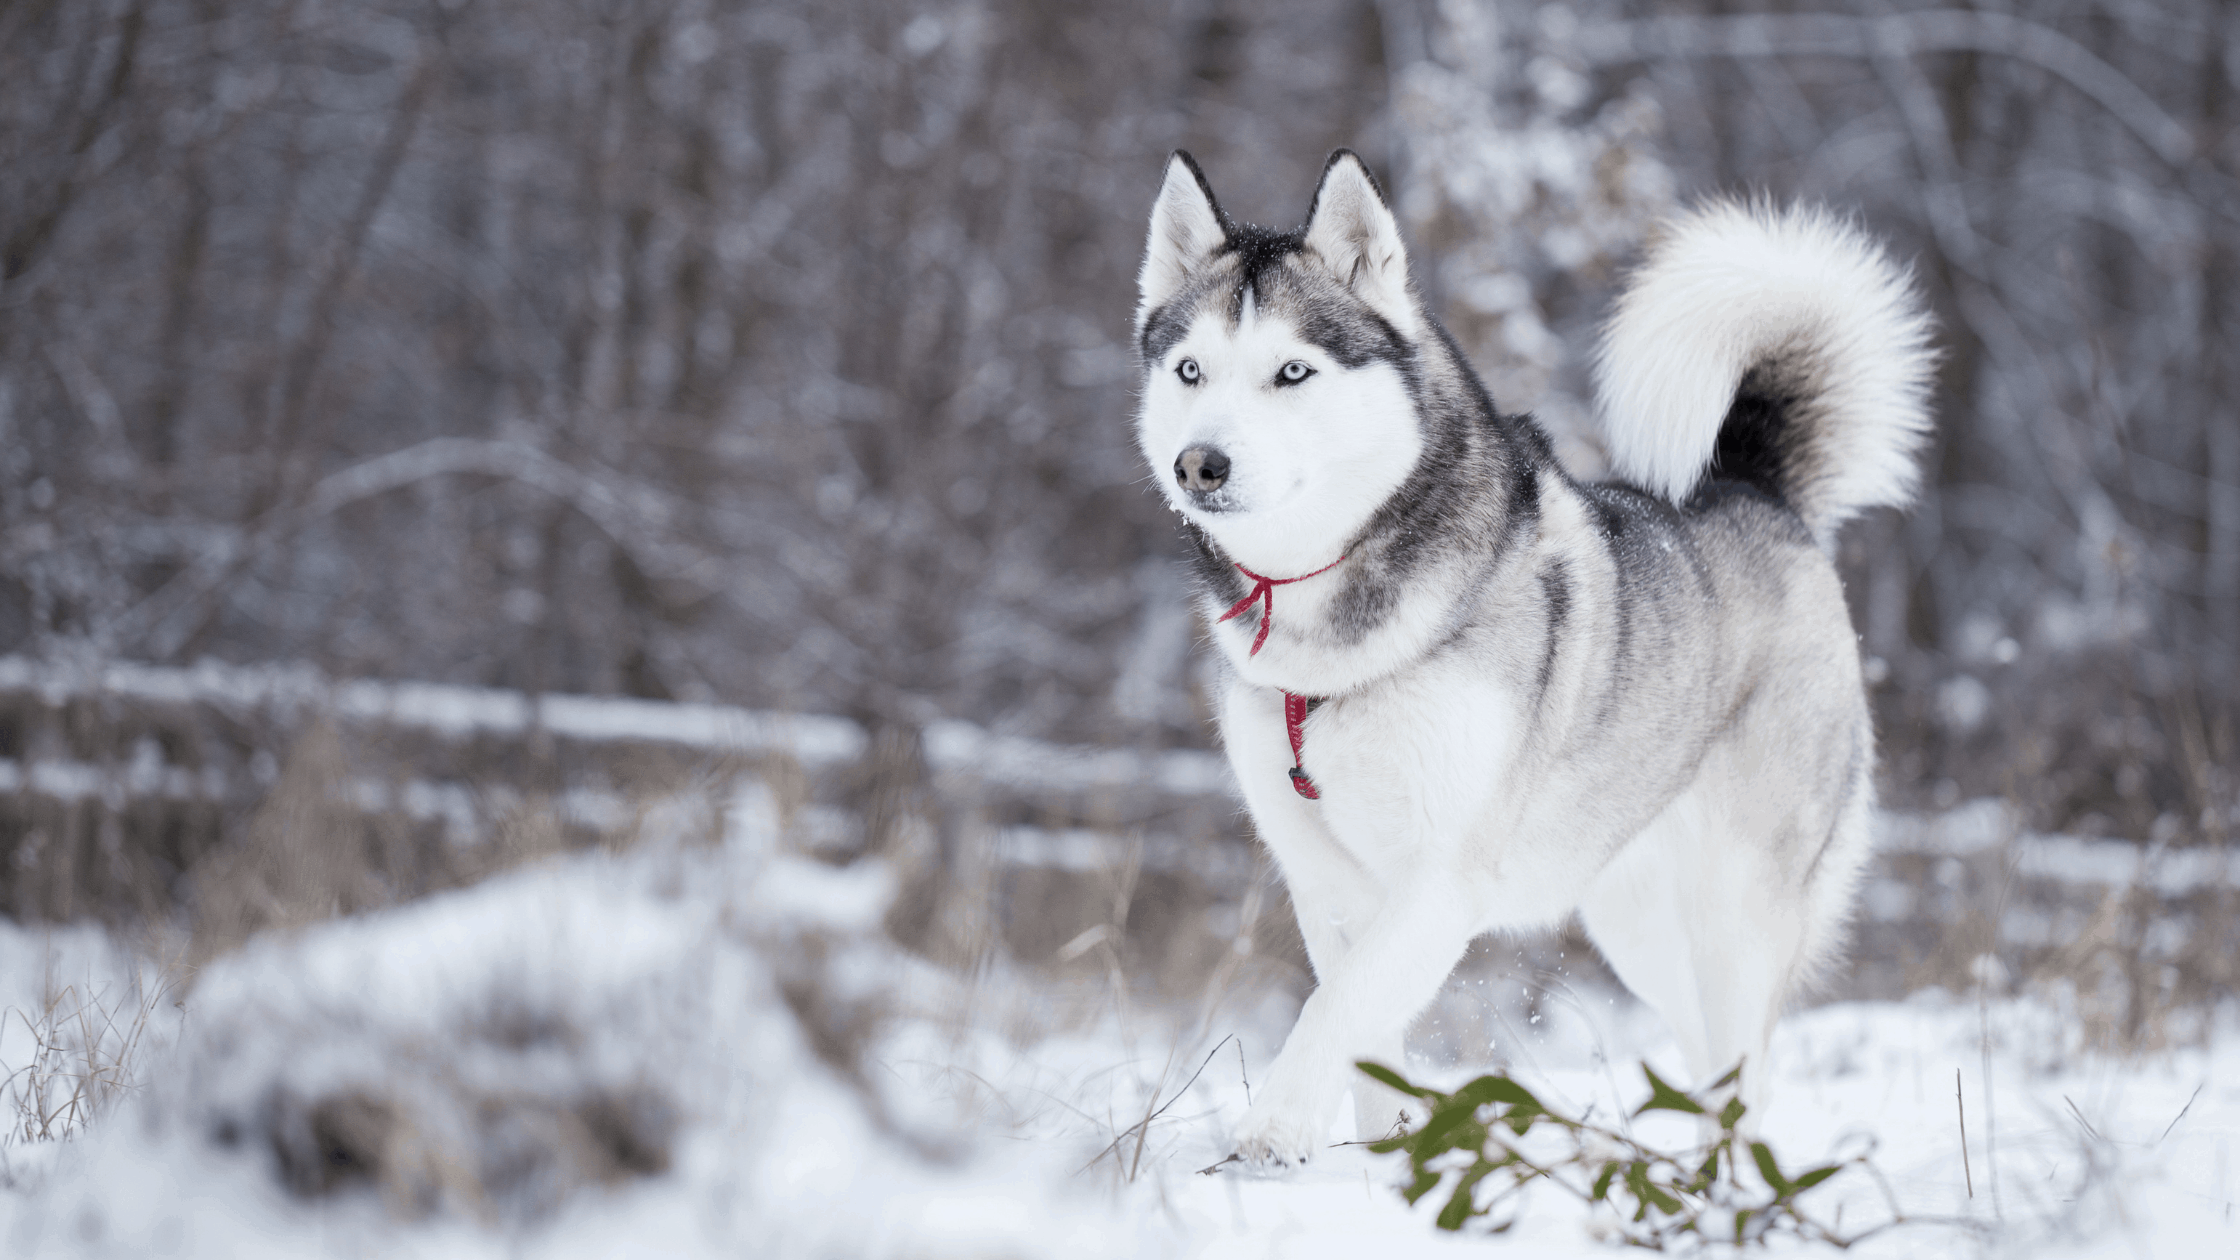 The Siberian Husky are energetic and could have a long life span.